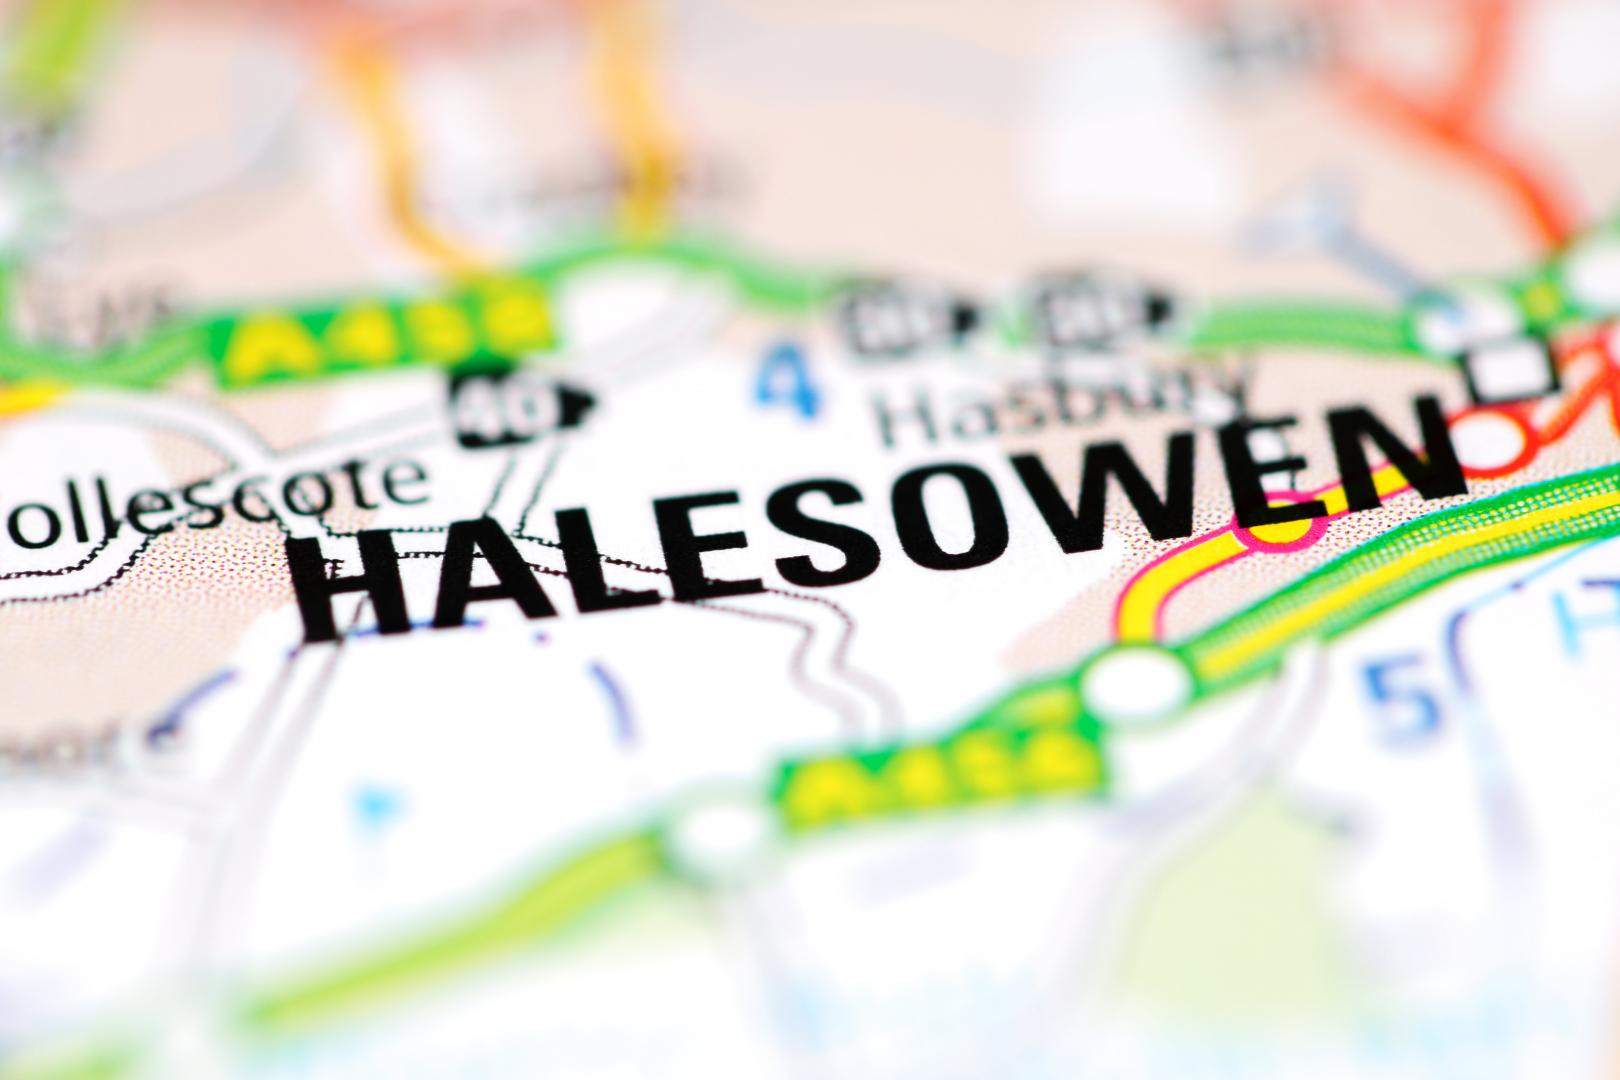 Area Guides for Halesowen - Hurst Green (1)